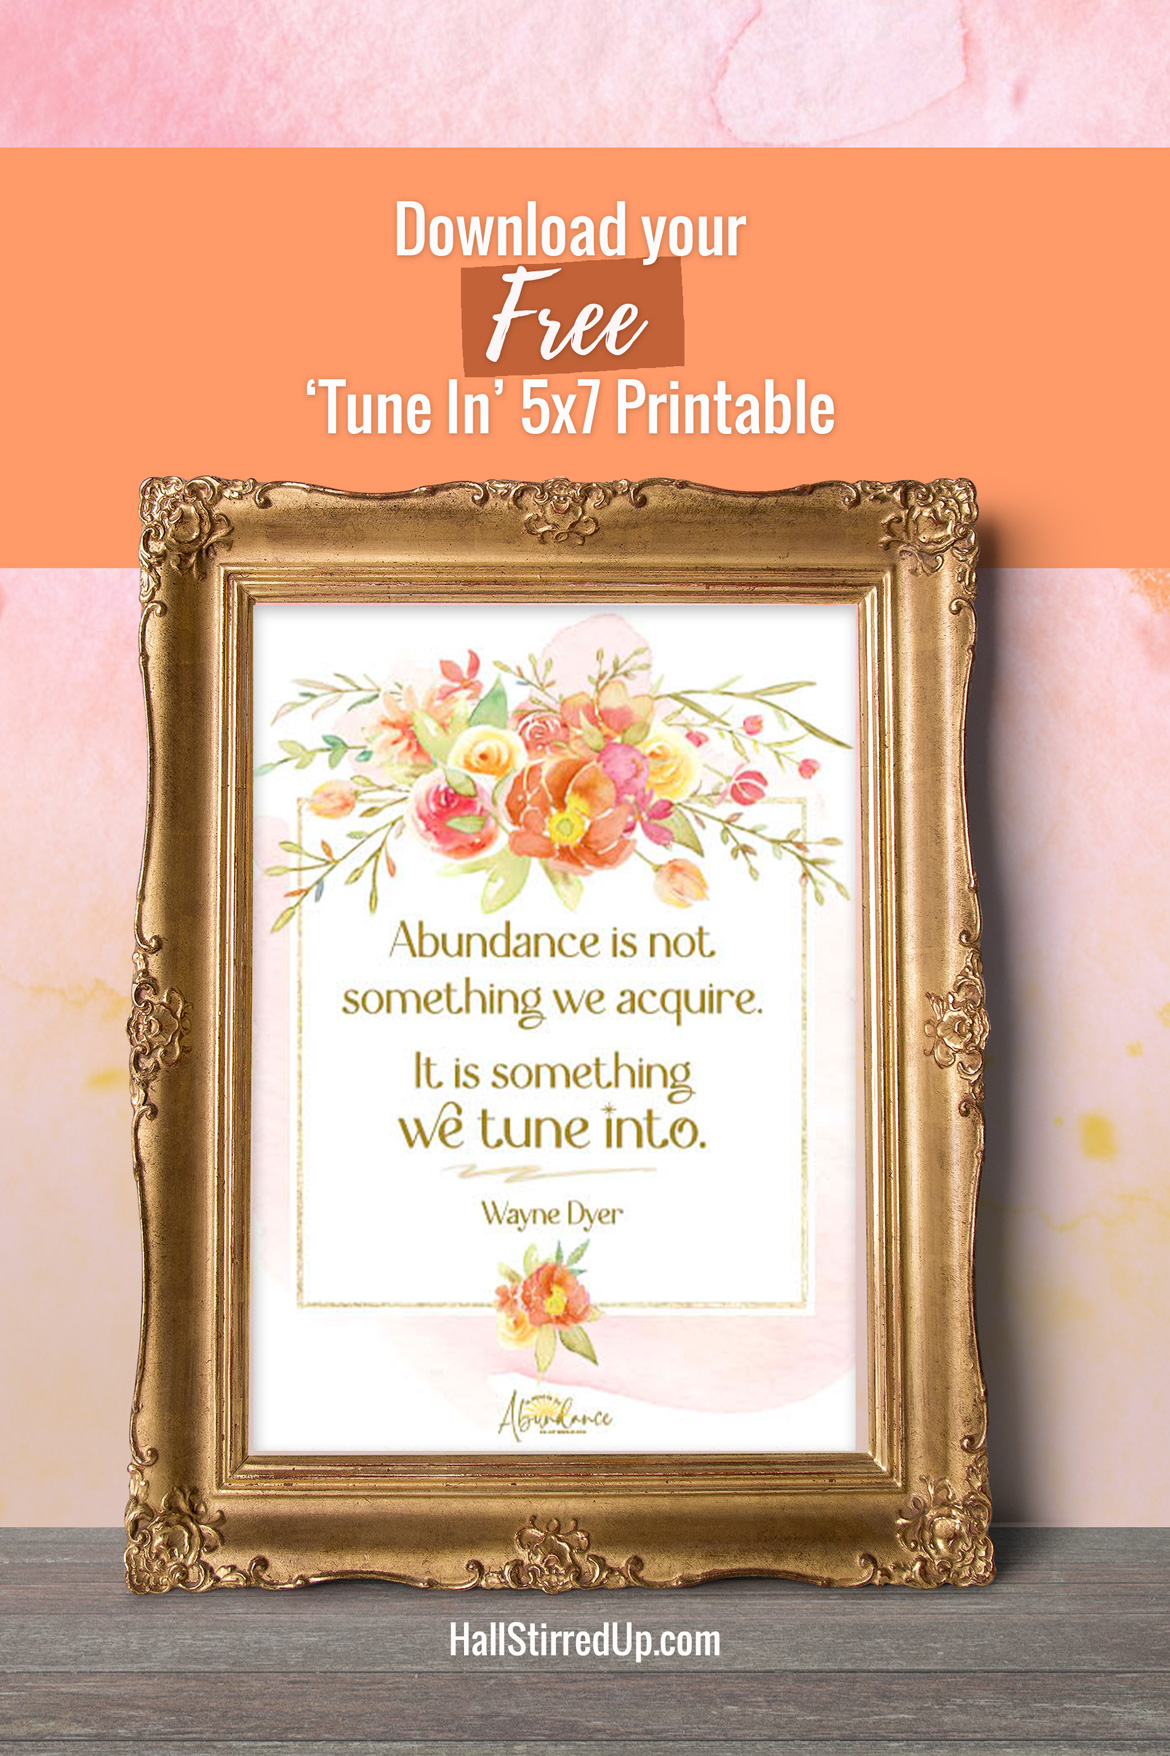 Tune in to abundance! Includes free printable